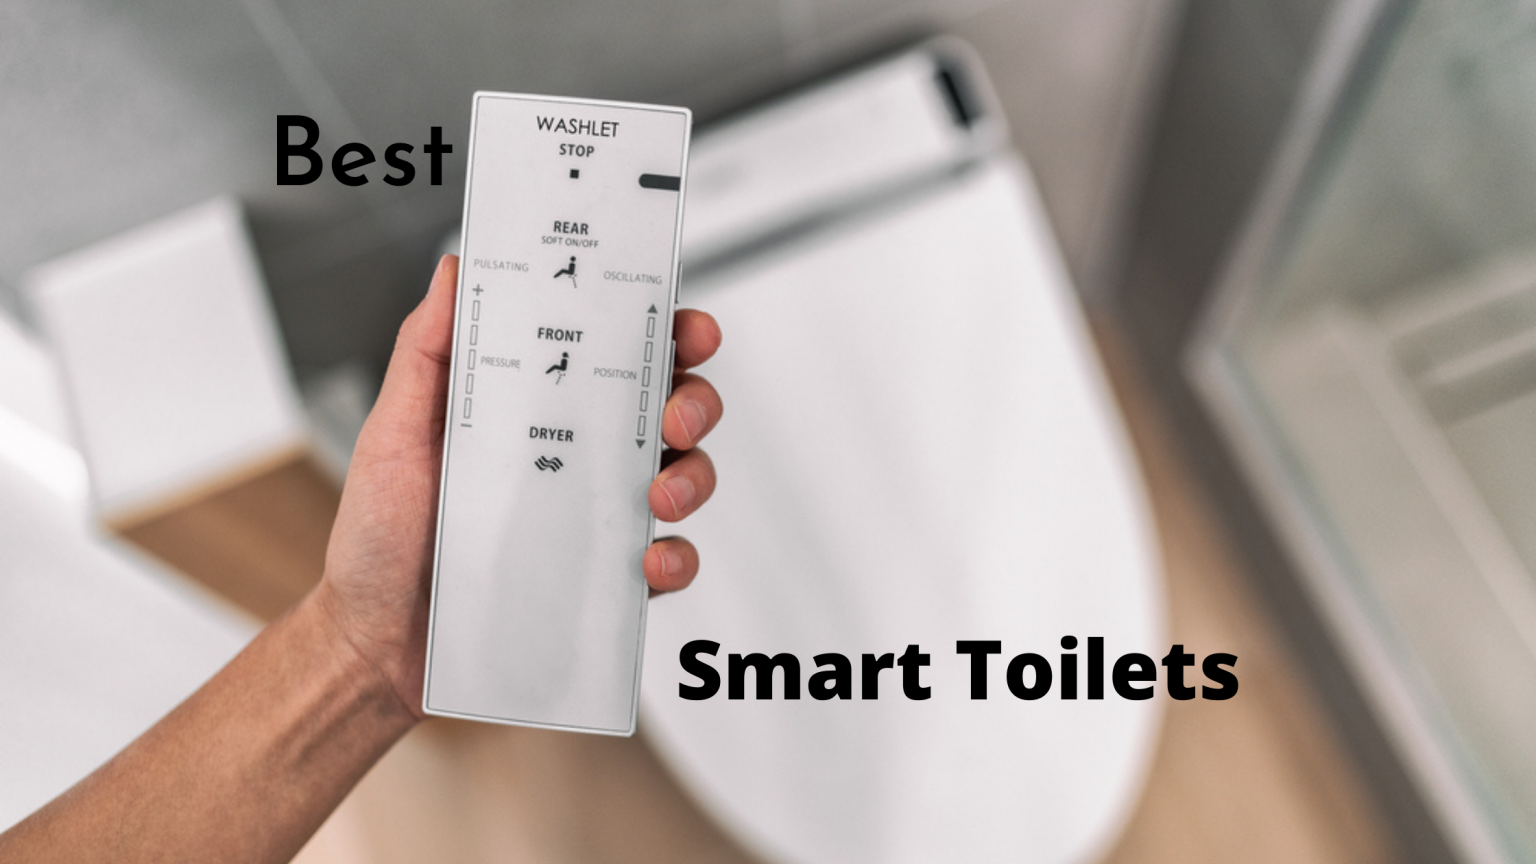 10 Best Smart Toilets Reviews 2021 Self Cleaning & Remote Control